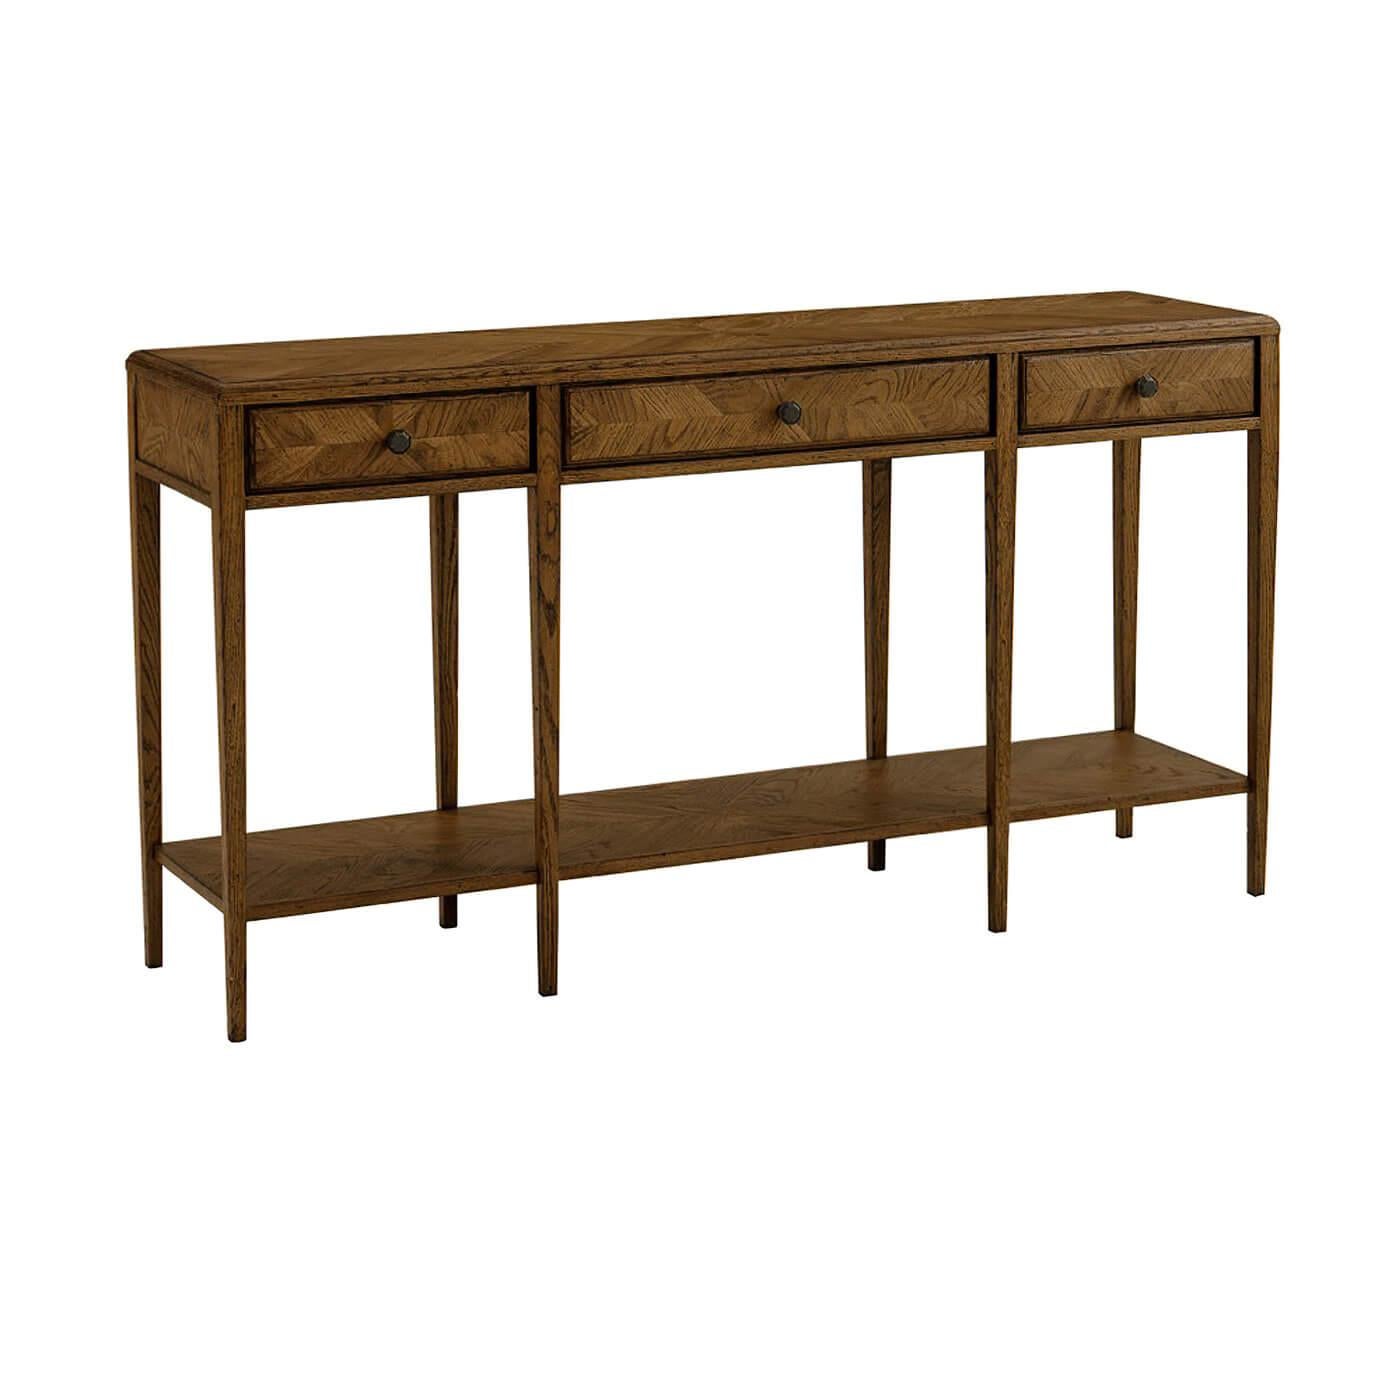 Rustic Oak Parquetry Two Tier Console Table, Dark For Sale